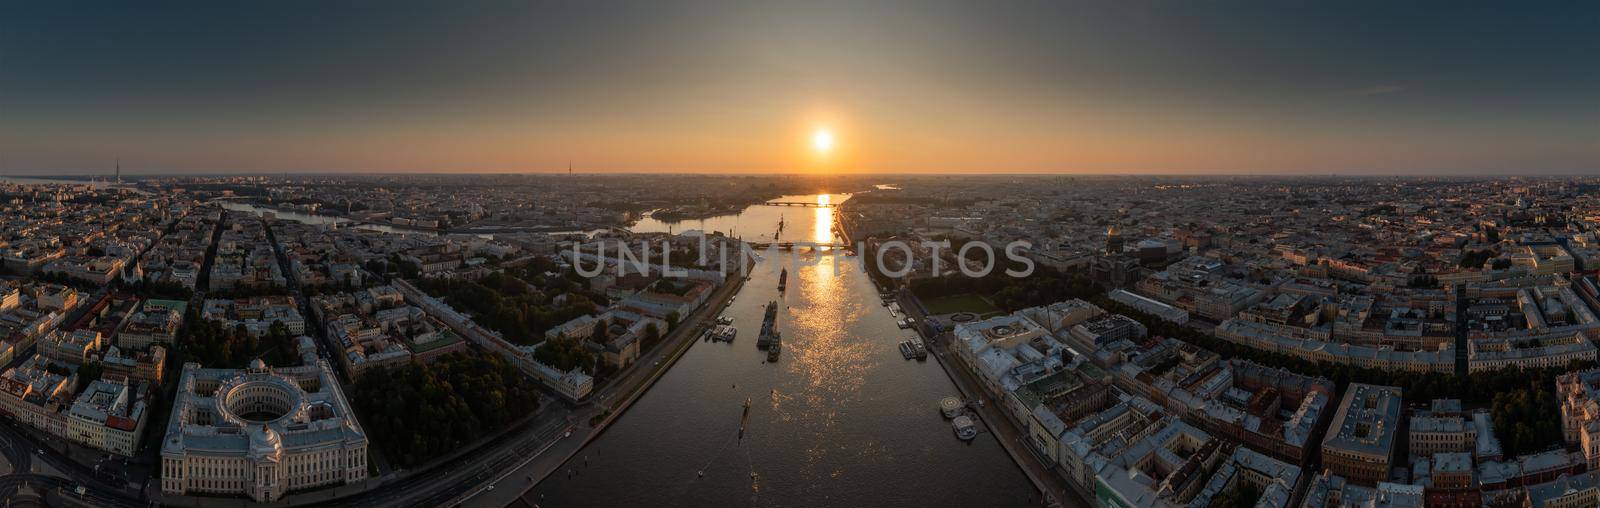 Aerial panoramic landscape of warships in the waters of the Neva River before the holiday of the Russian Navy, sea power, the latest cruisers among the sights, Isaac cathedral on a background. High quality photo